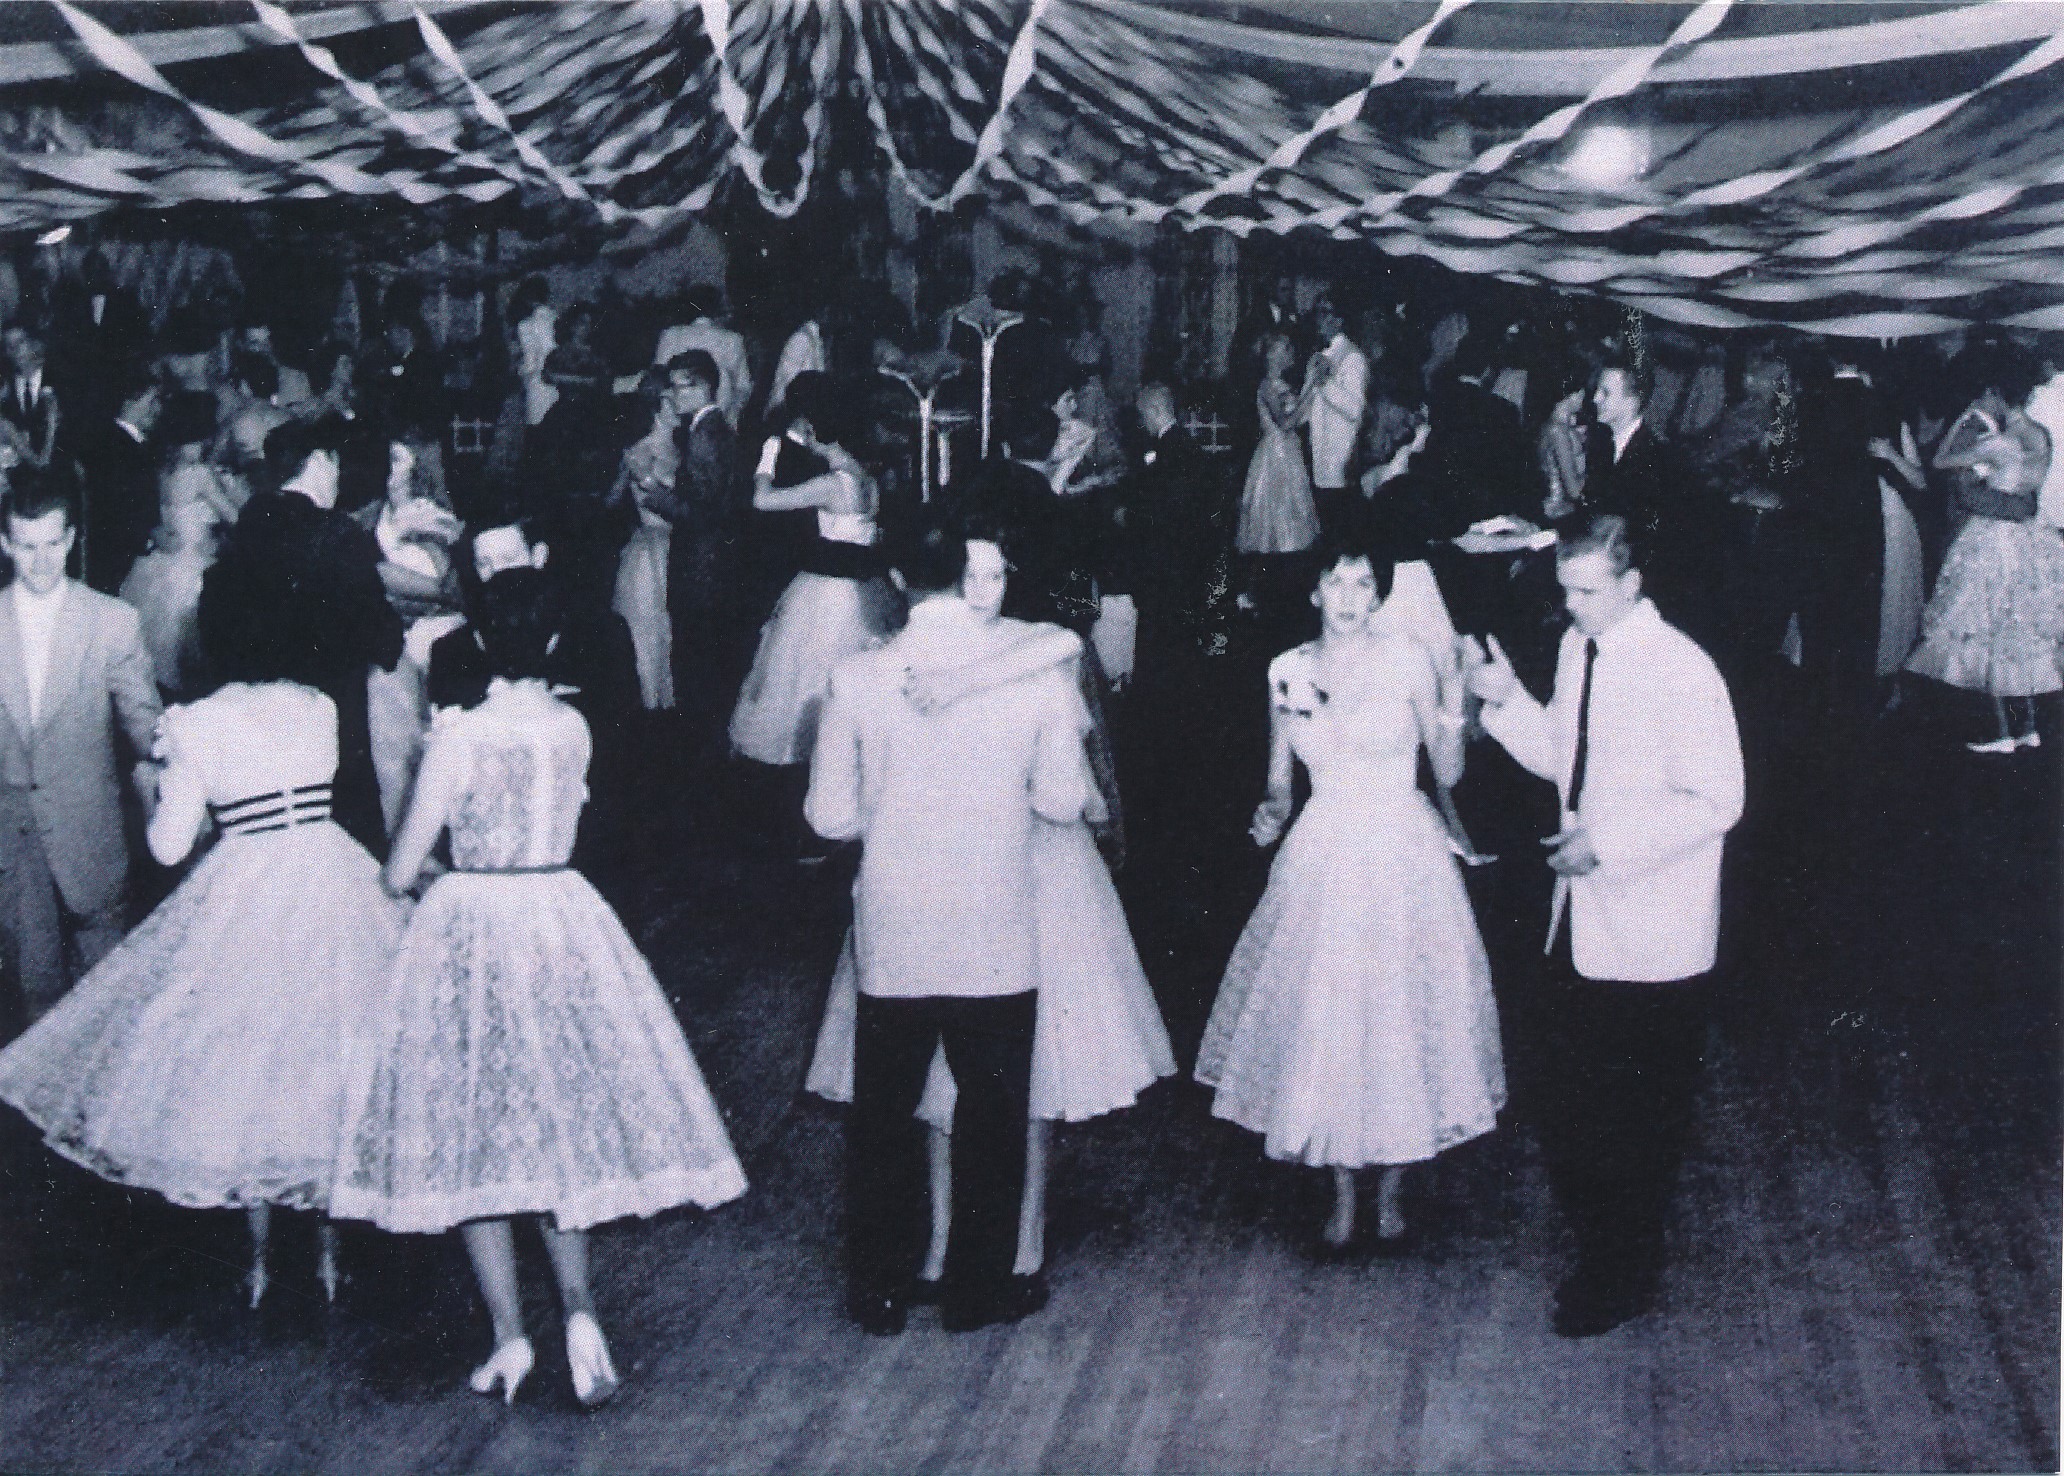 A dance in the Dixie Academy Building Auditorium